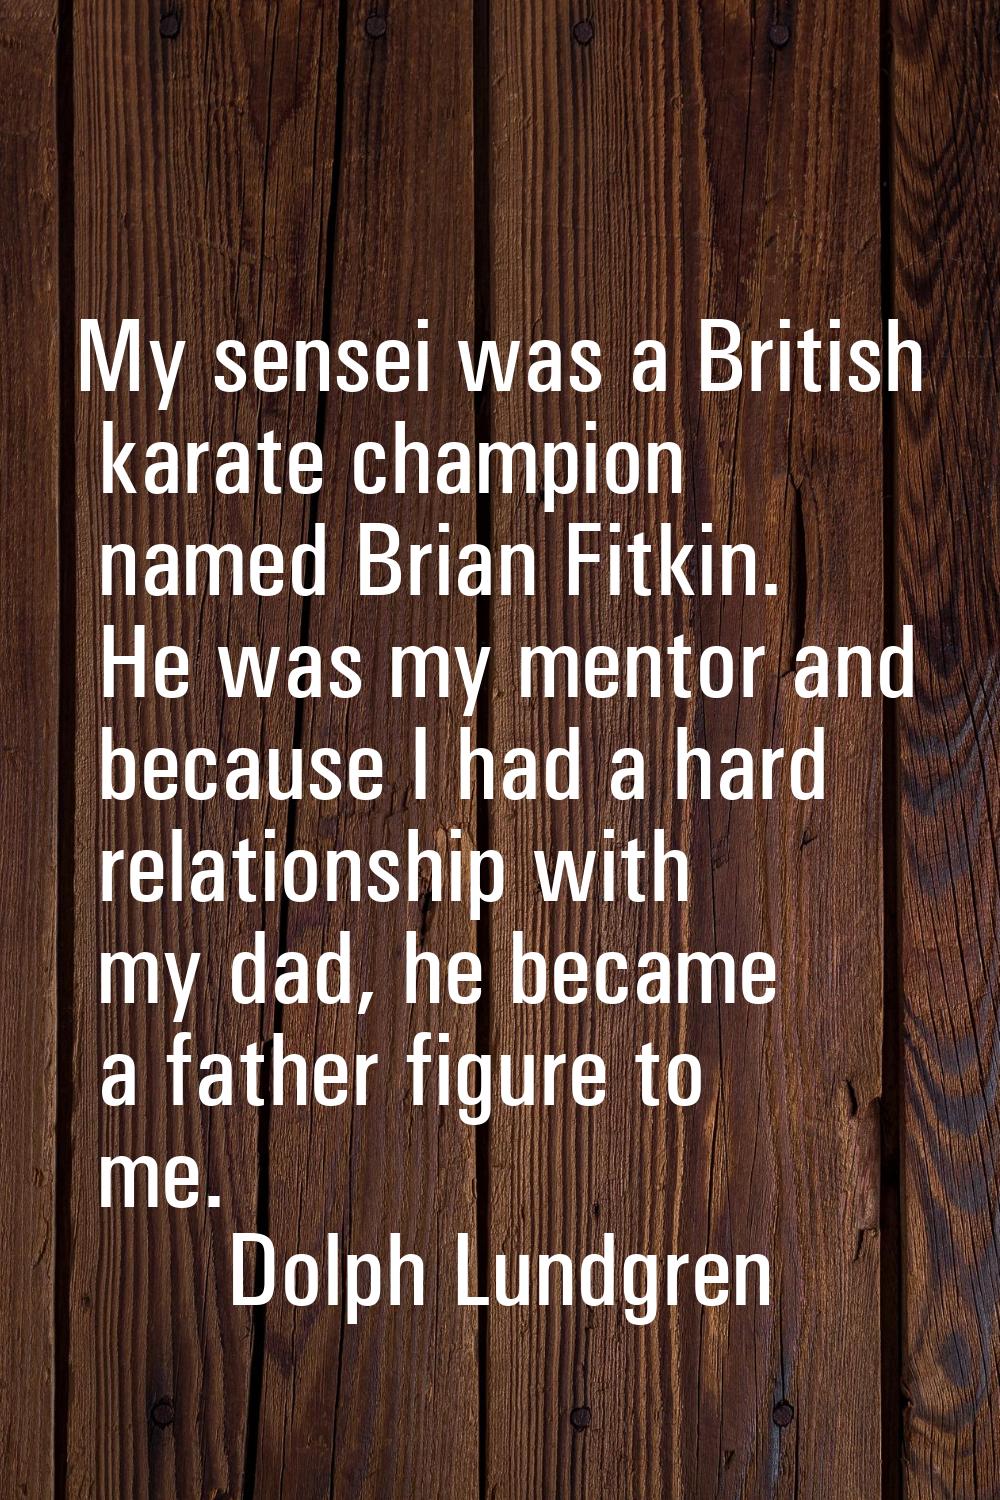 My sensei was a British karate champion named Brian Fitkin. He was my mentor and because I had a ha